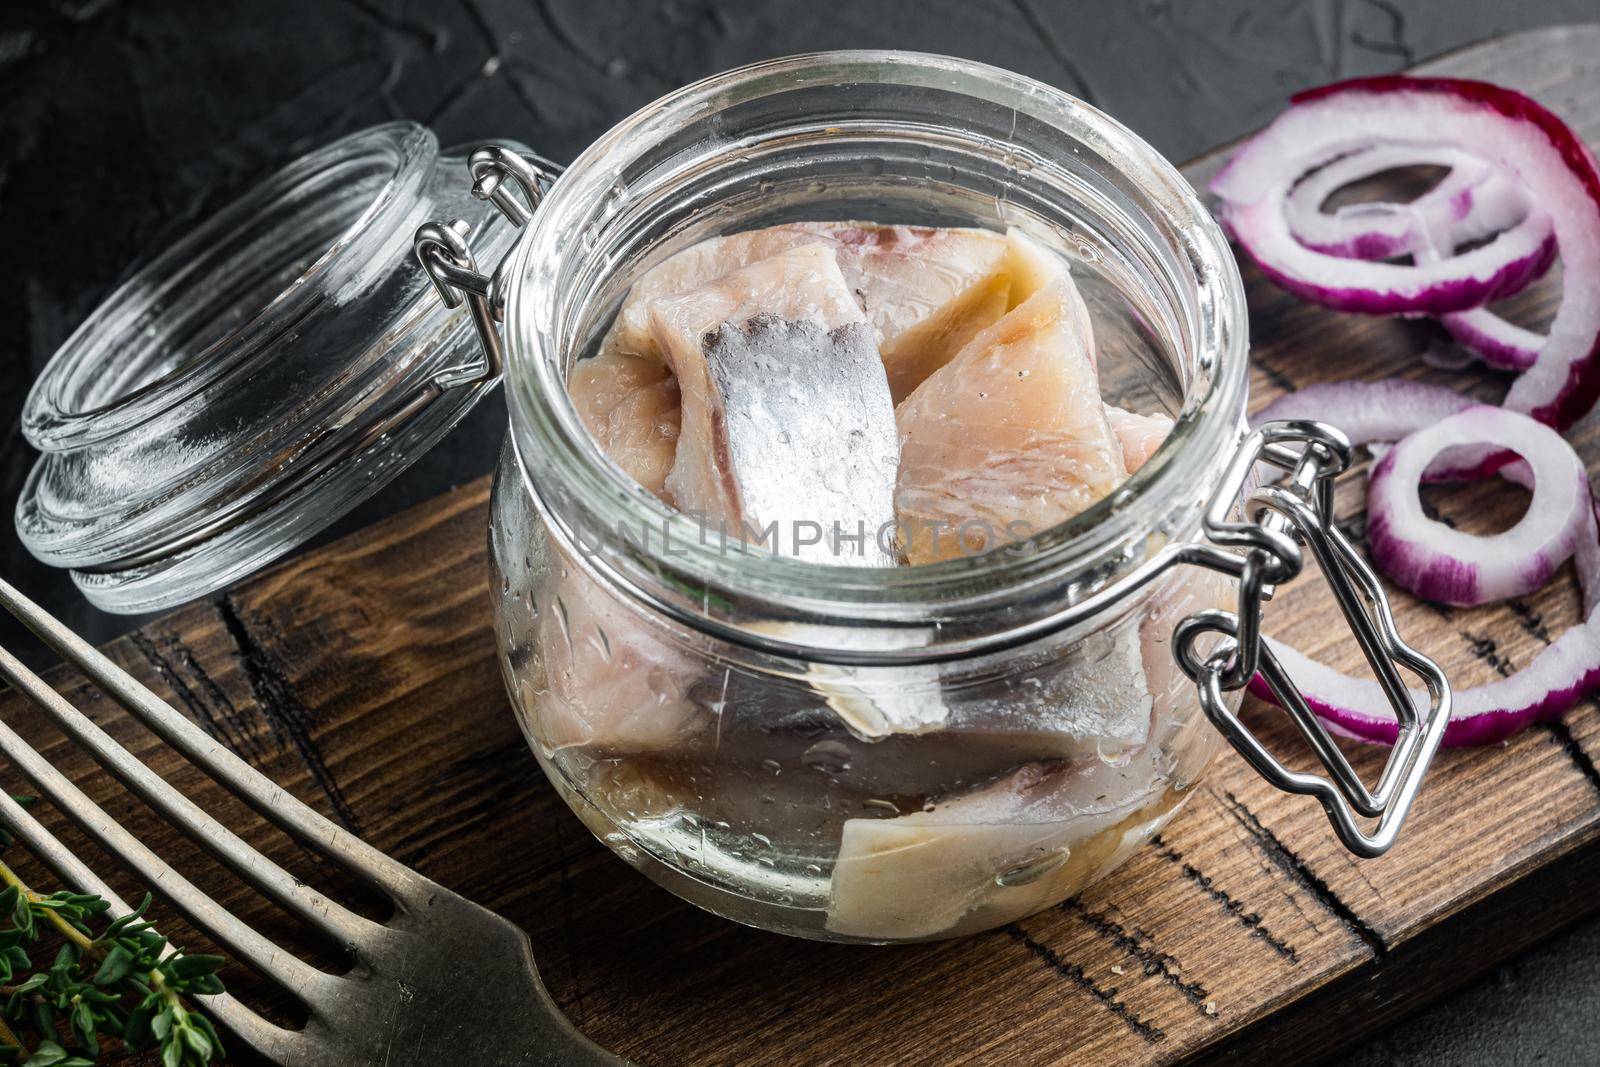 Pickled herring, on black background by Ilianesolenyi